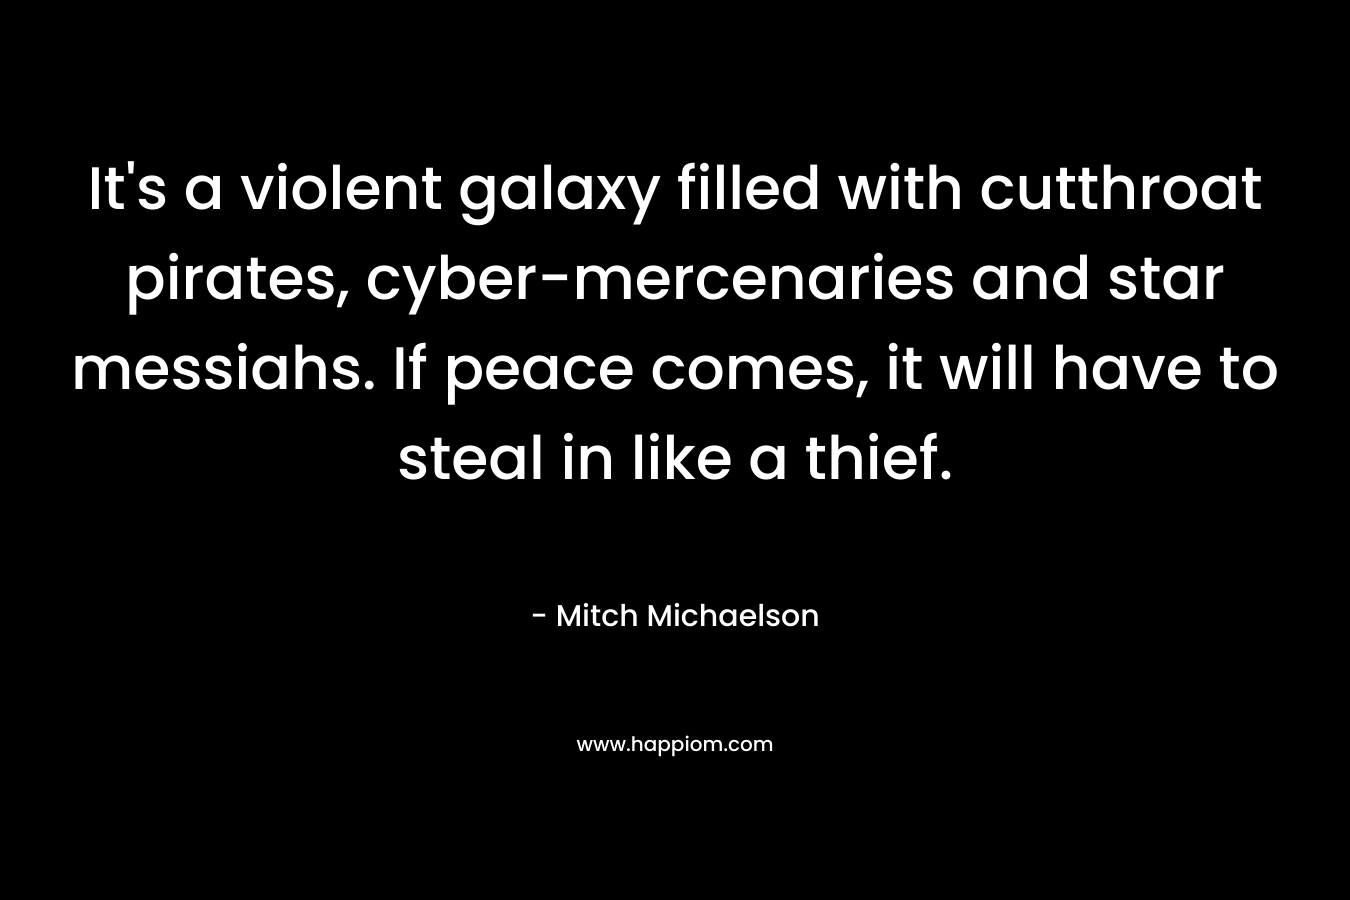 It’s a violent galaxy filled with cutthroat pirates, cyber-mercenaries and star messiahs. If peace comes, it will have to steal in like a thief. – Mitch Michaelson